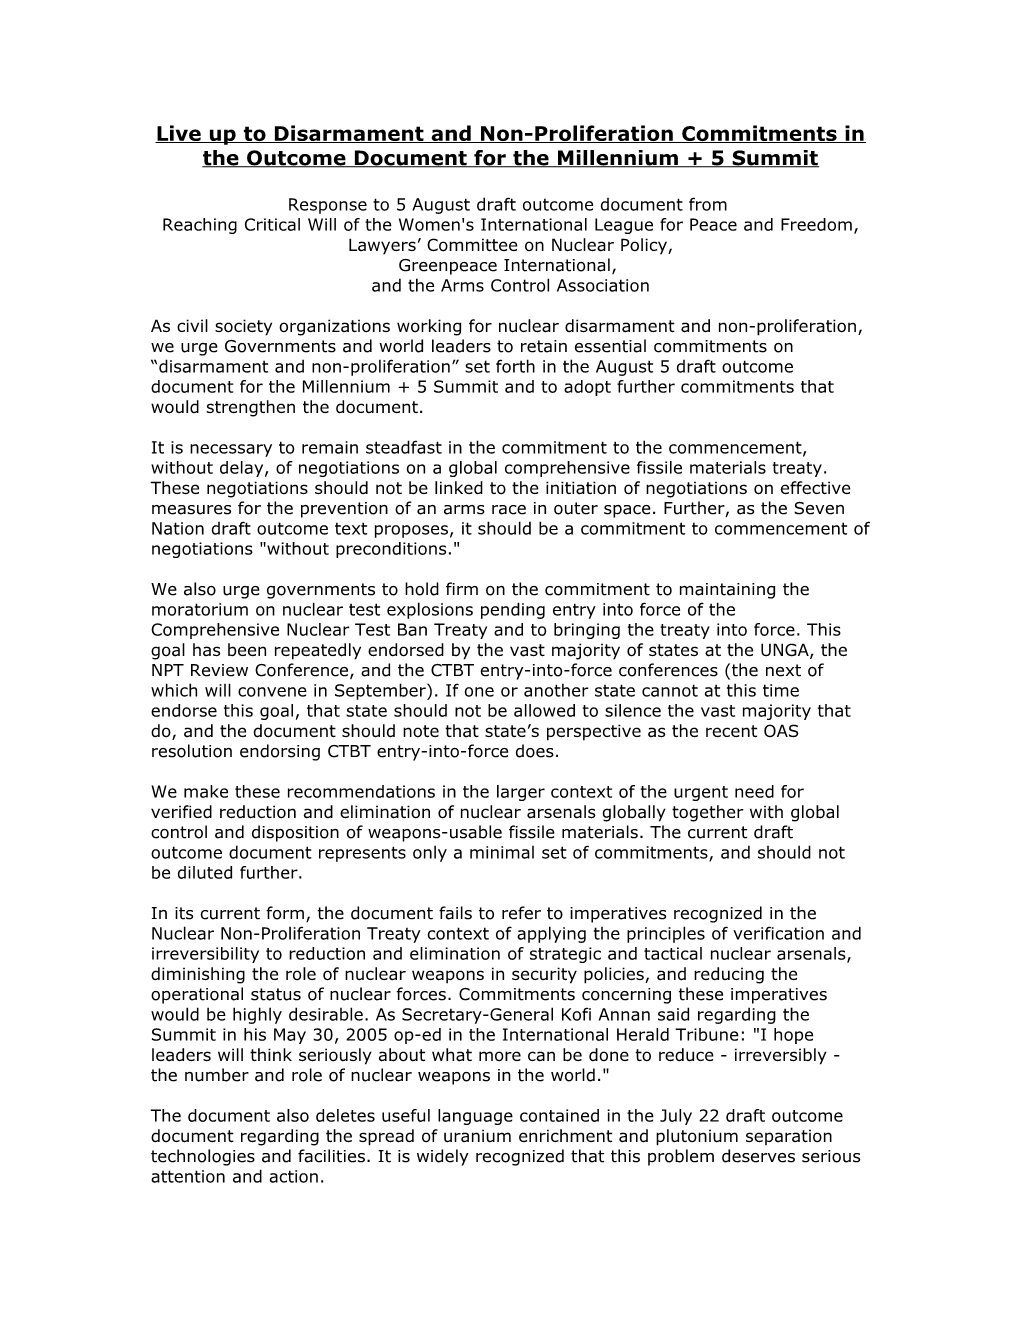 Live up to Disarmament and Non-Proliferation Commitments in the Outcome Document for The